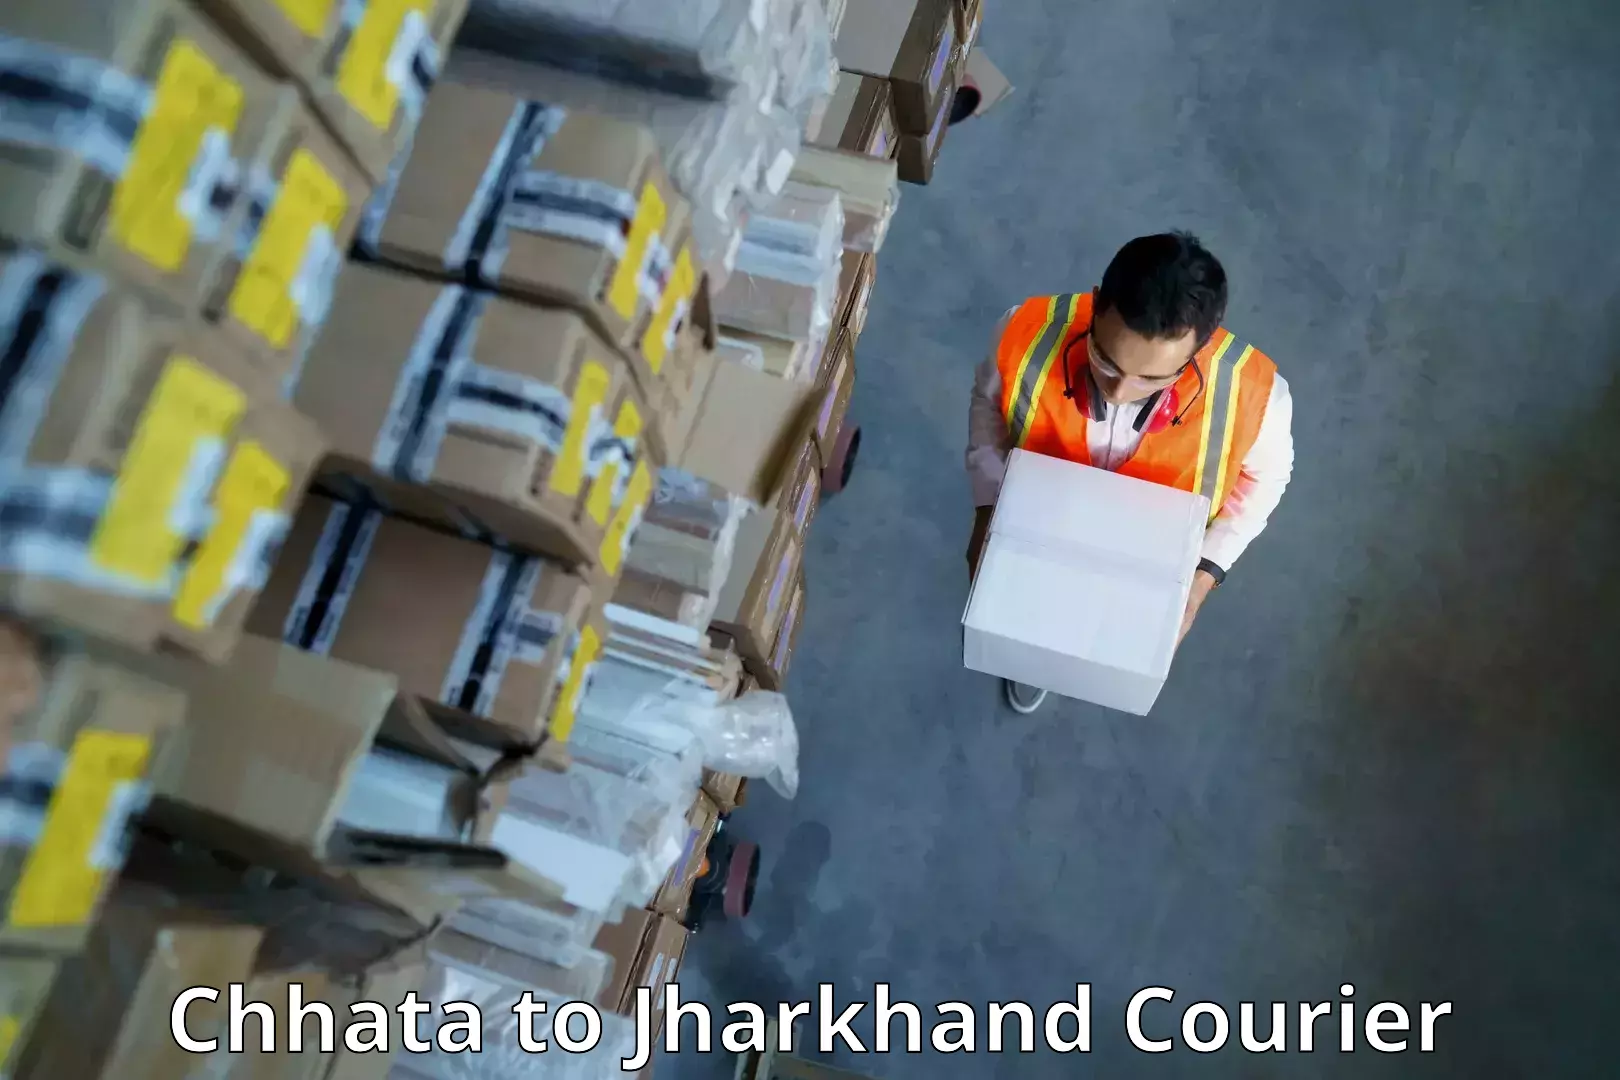 Courier service innovation Chhata to Jharkhand